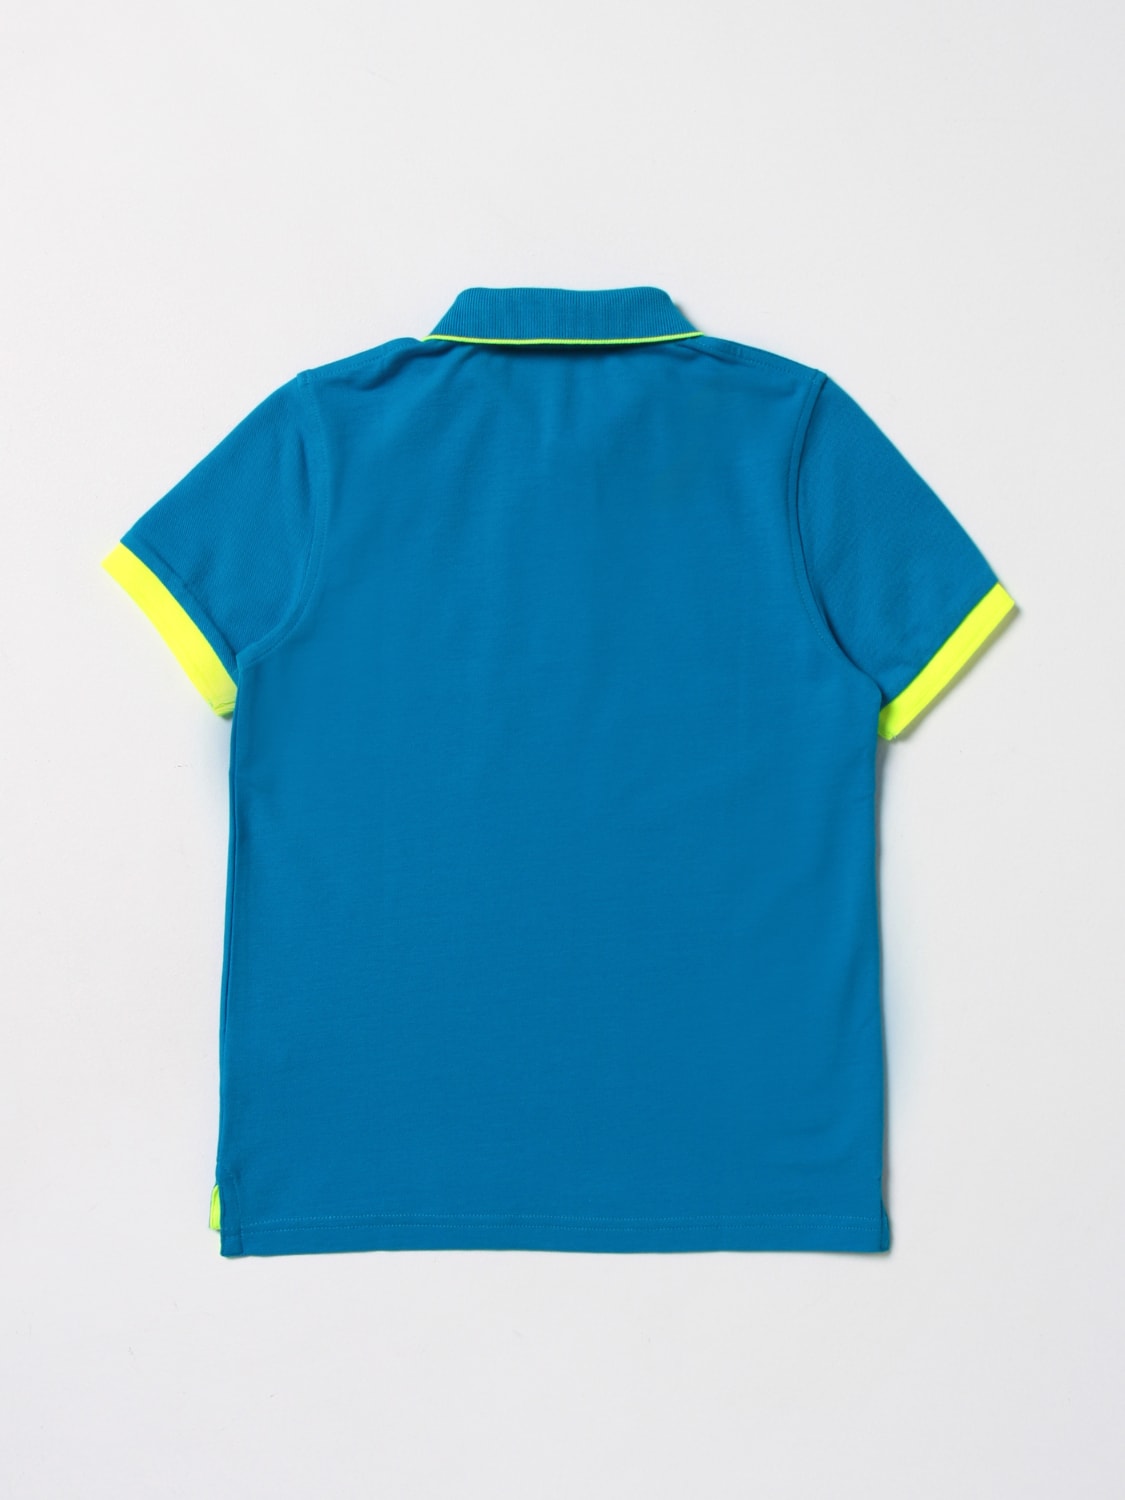 SUN 68: t-shirt for boys - Turquoise | Sun 68 t-shirt A33320 online on ...